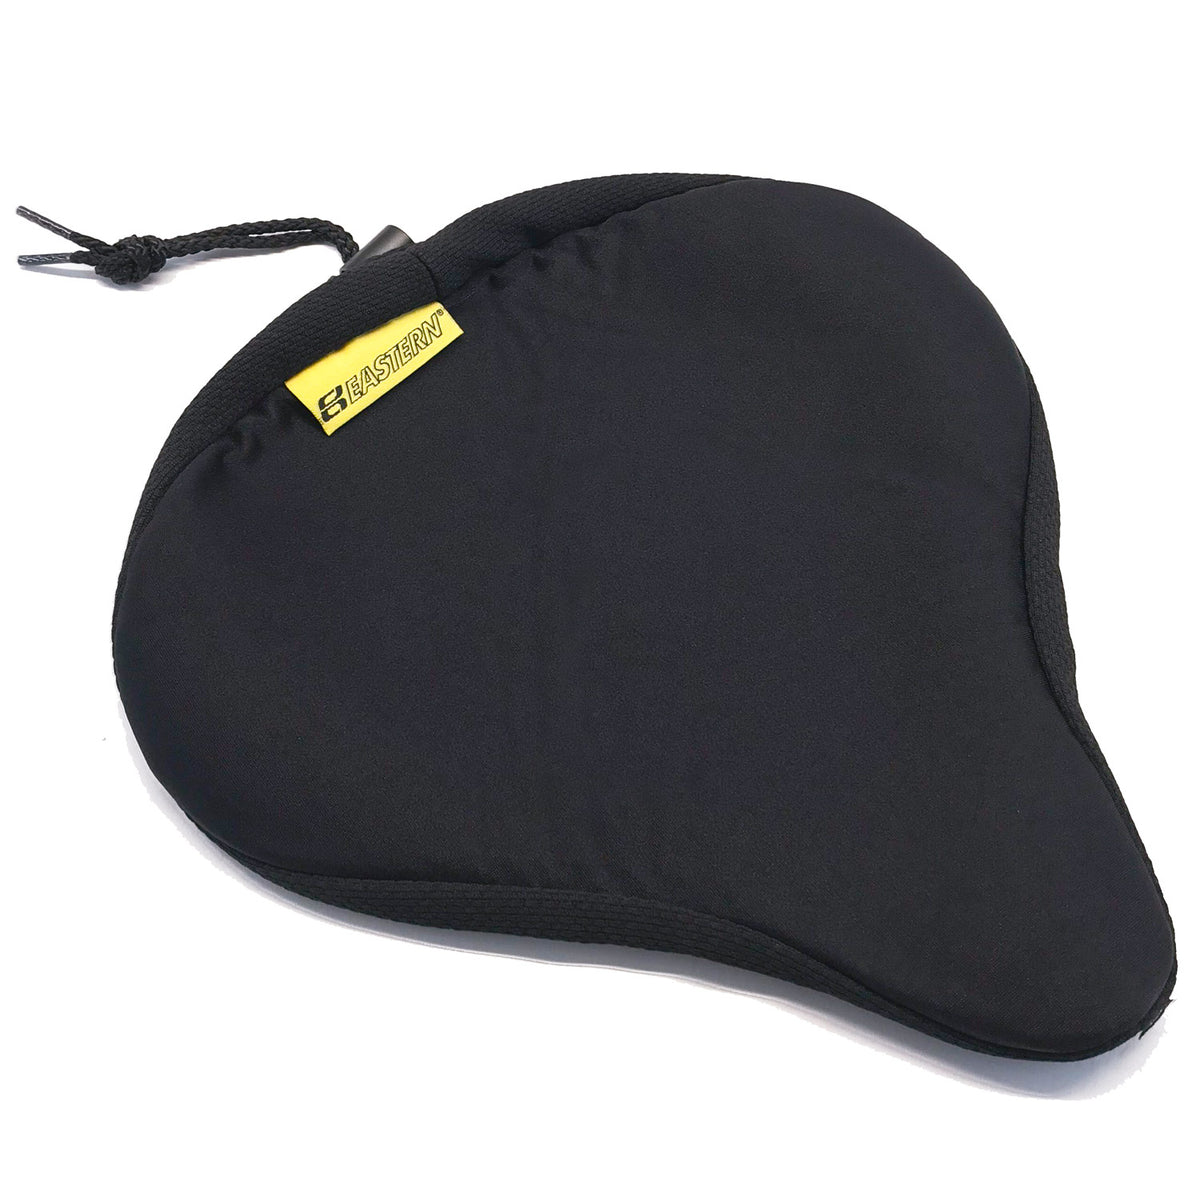 Big Softy Gel Bike Seat Cover (size large) - Super soft and